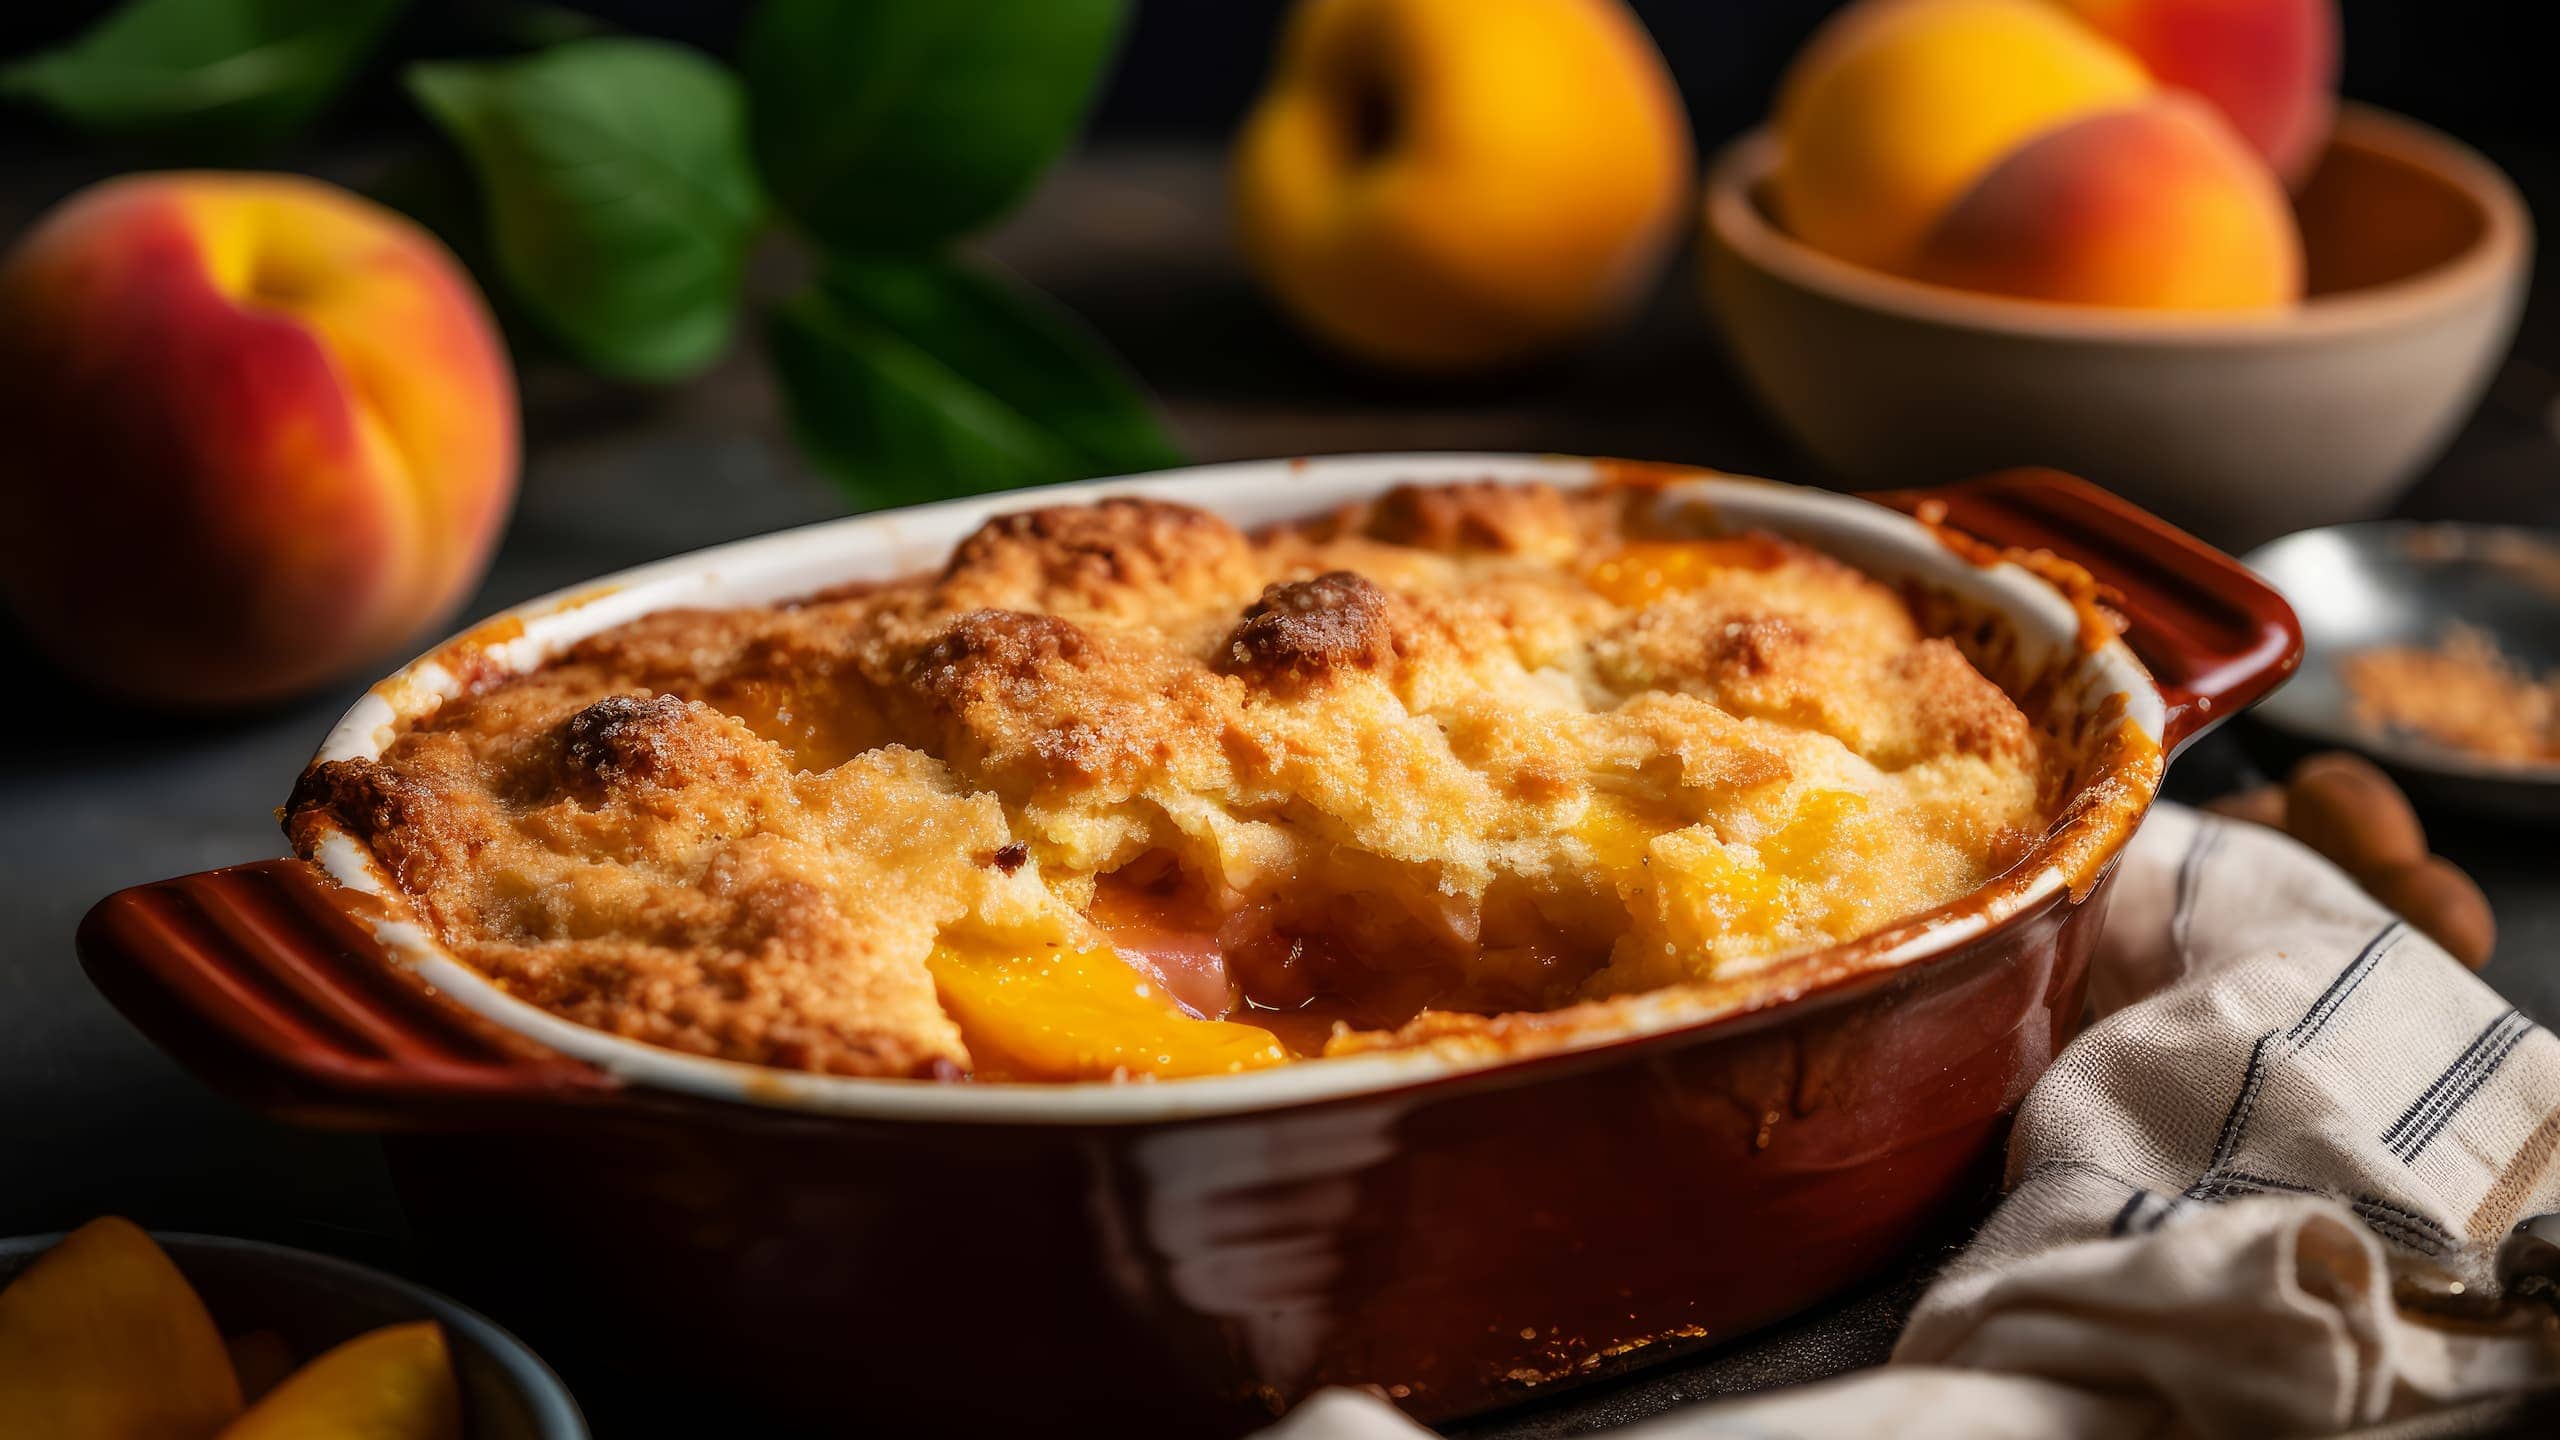 My version of Southern peach cobbler